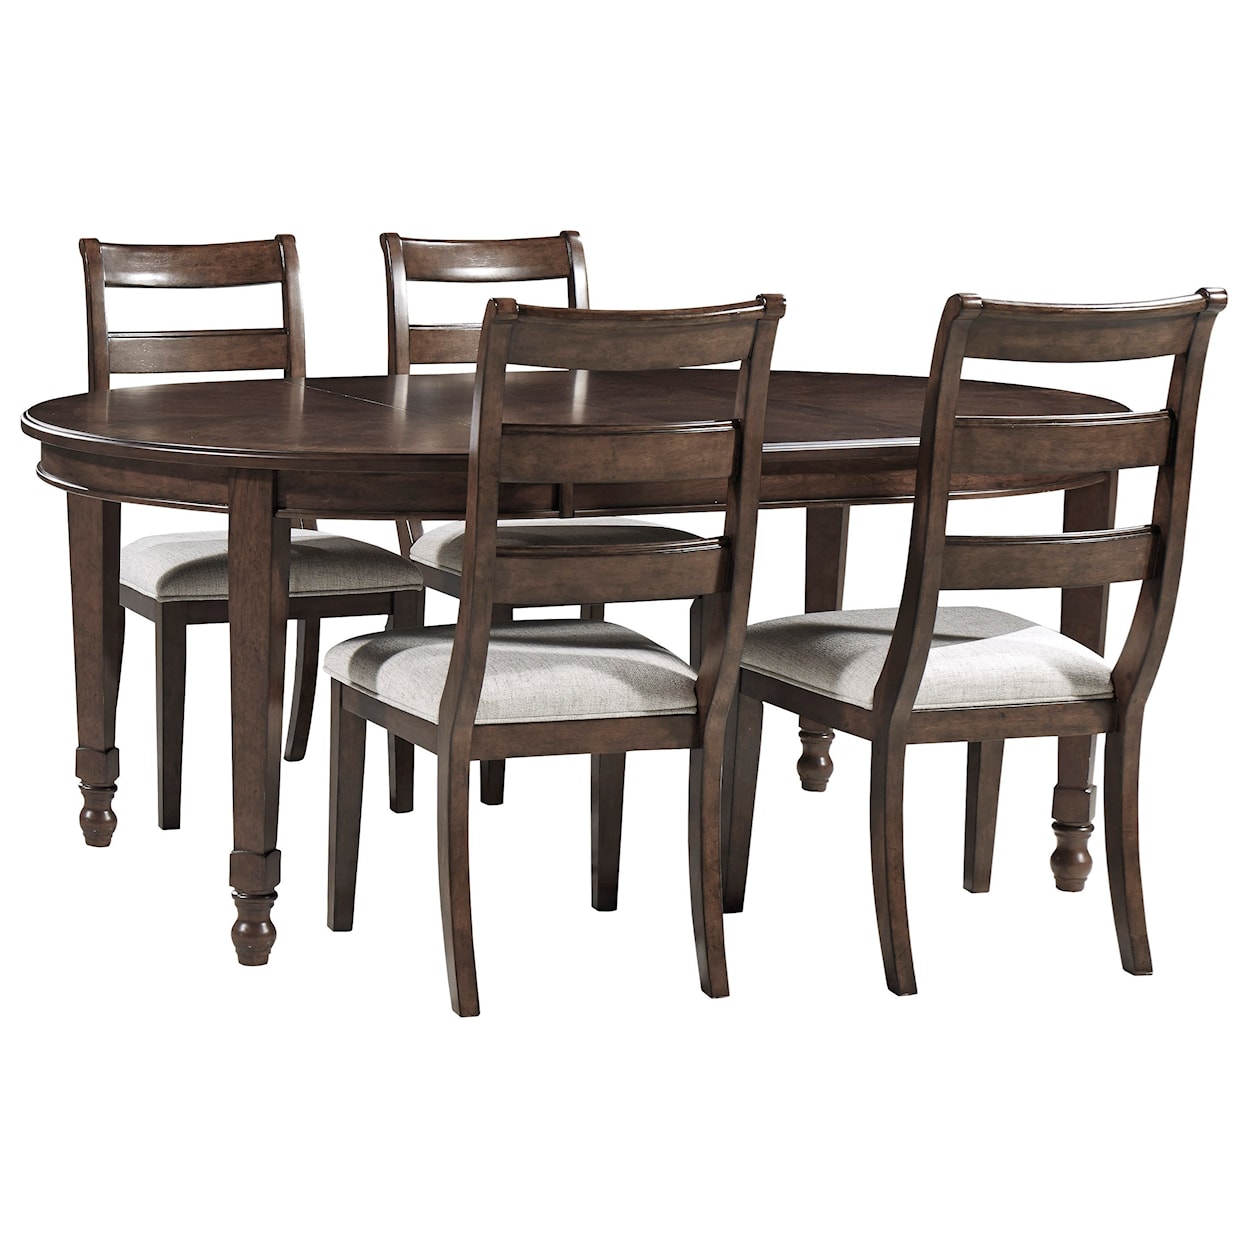 Signature Design by Ashley Adinton 5-Piece Table and Chair Set